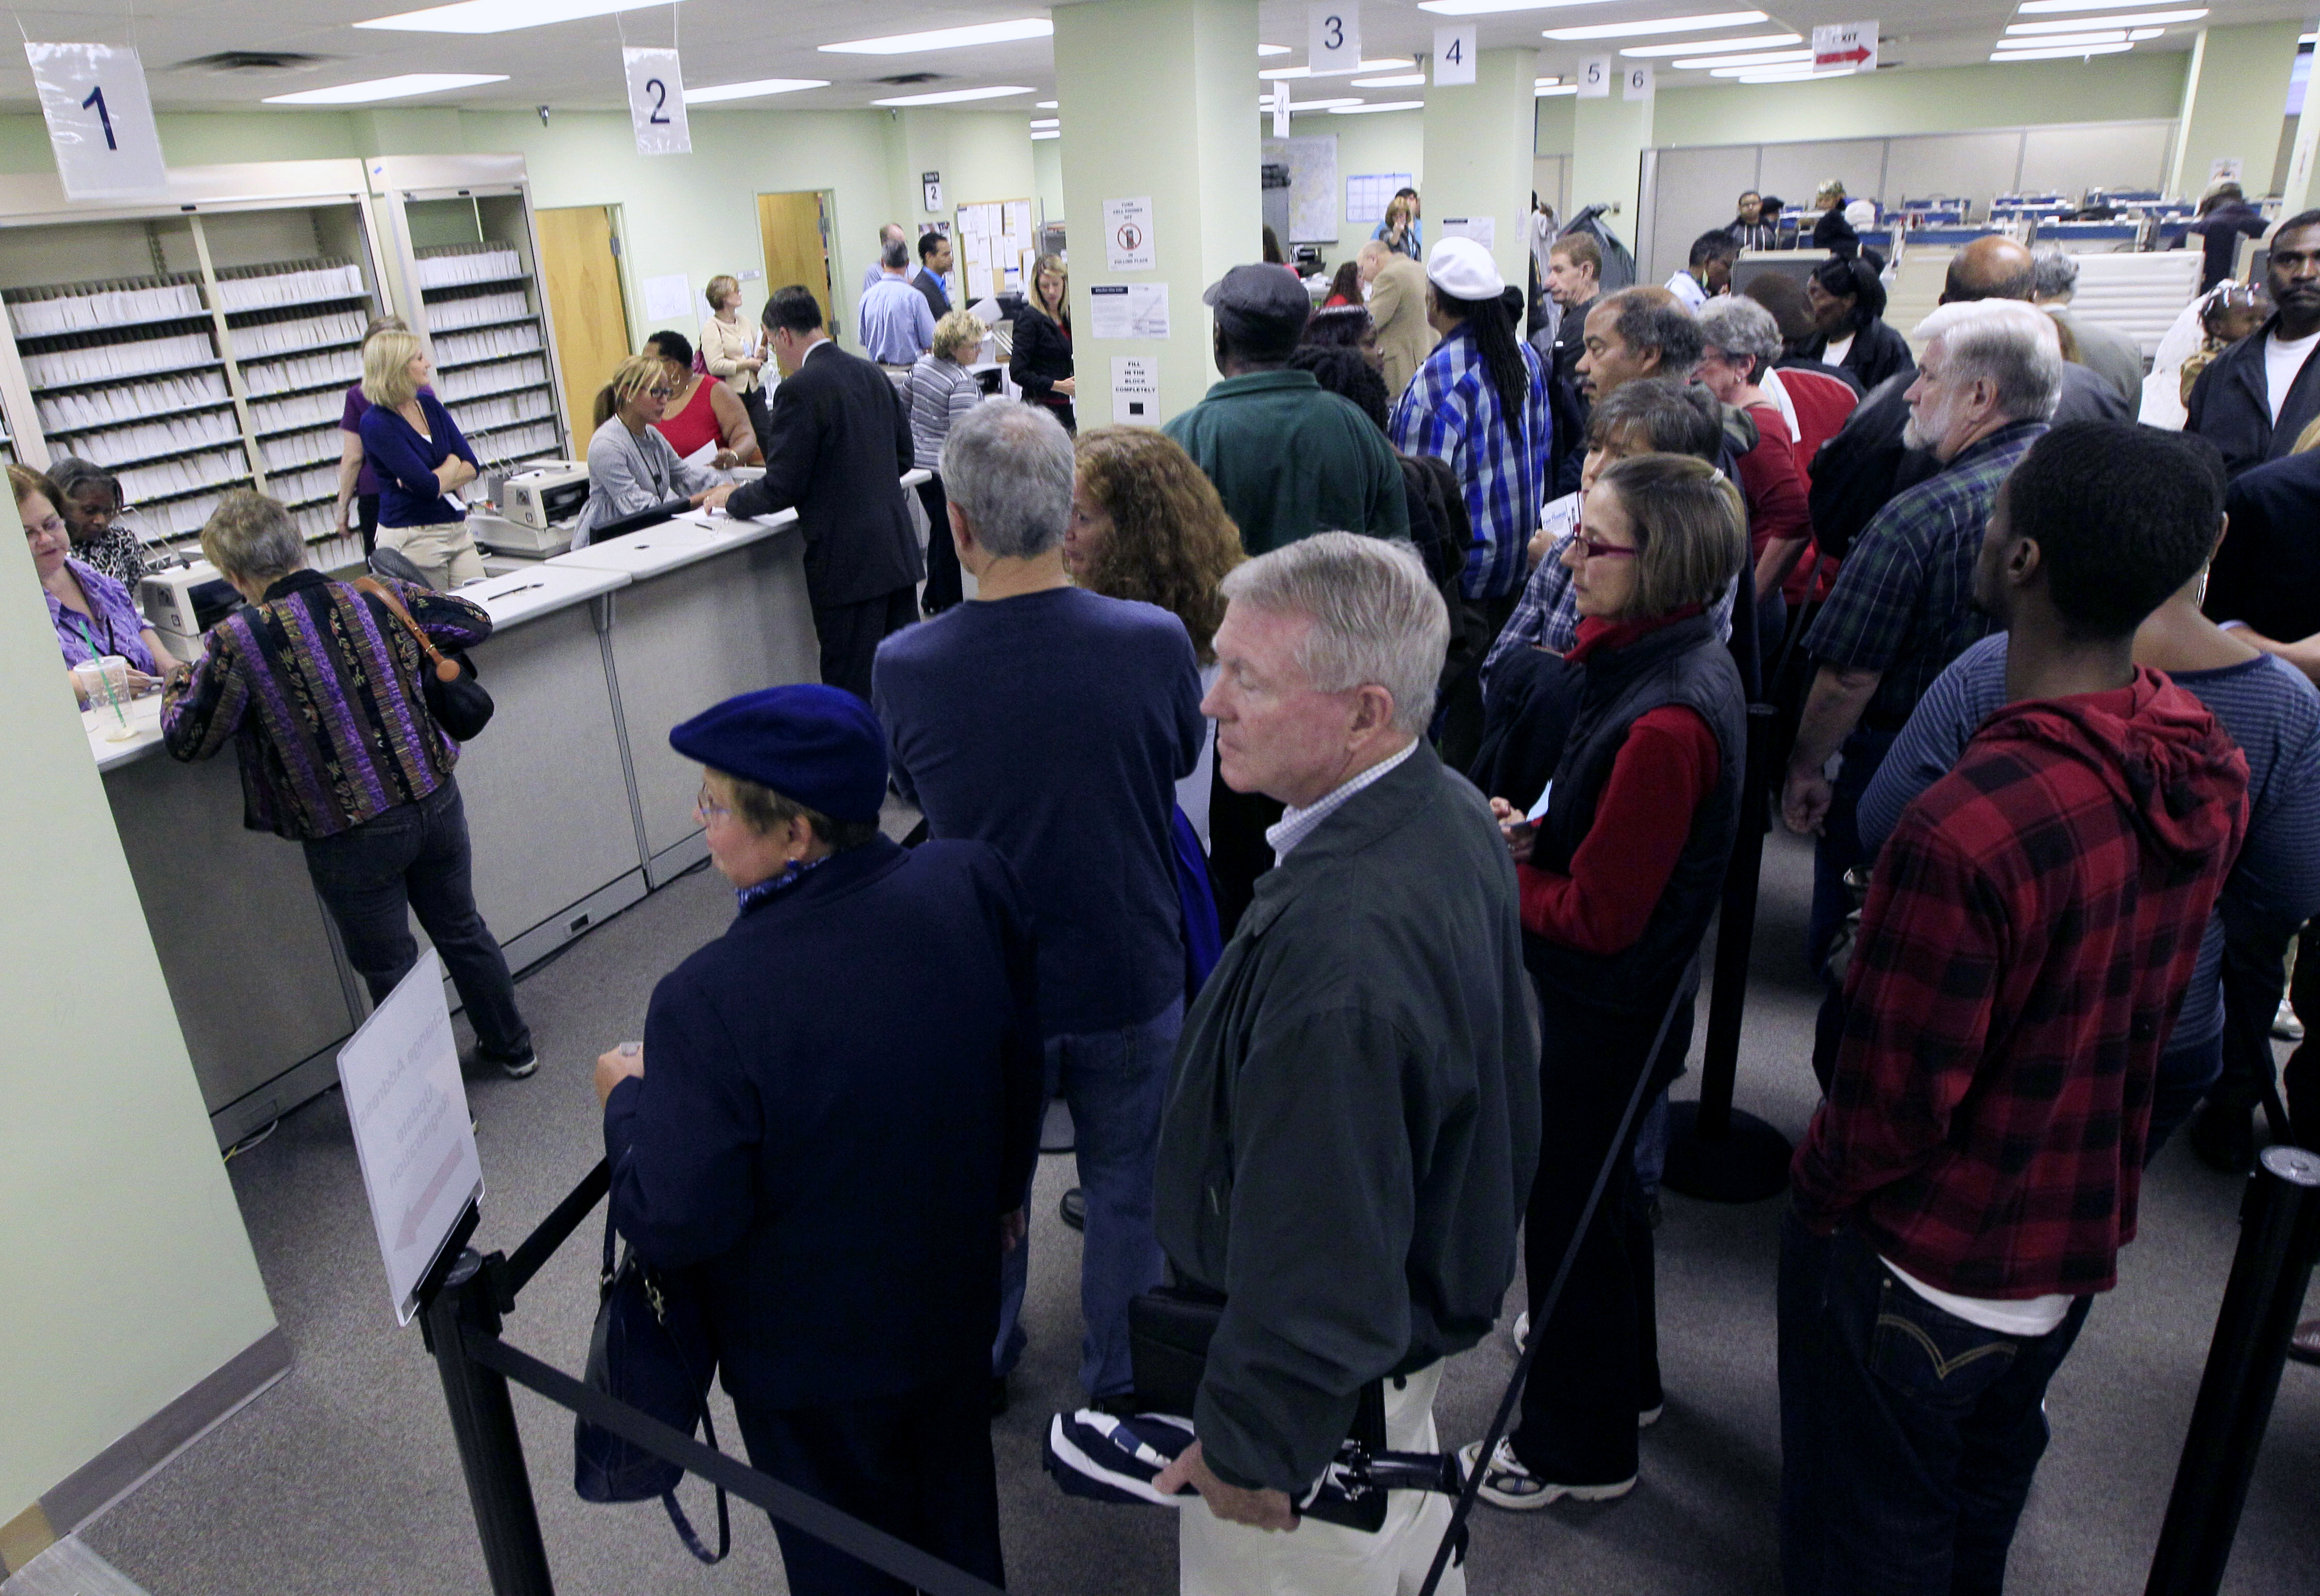 This Oct. 2, 2012 file photo shows voters waiting in line to pick up their ballots inside the Hamilton County Board of Elections after it opened for early voting, in Cincinnati. (Al Behrman—AP)